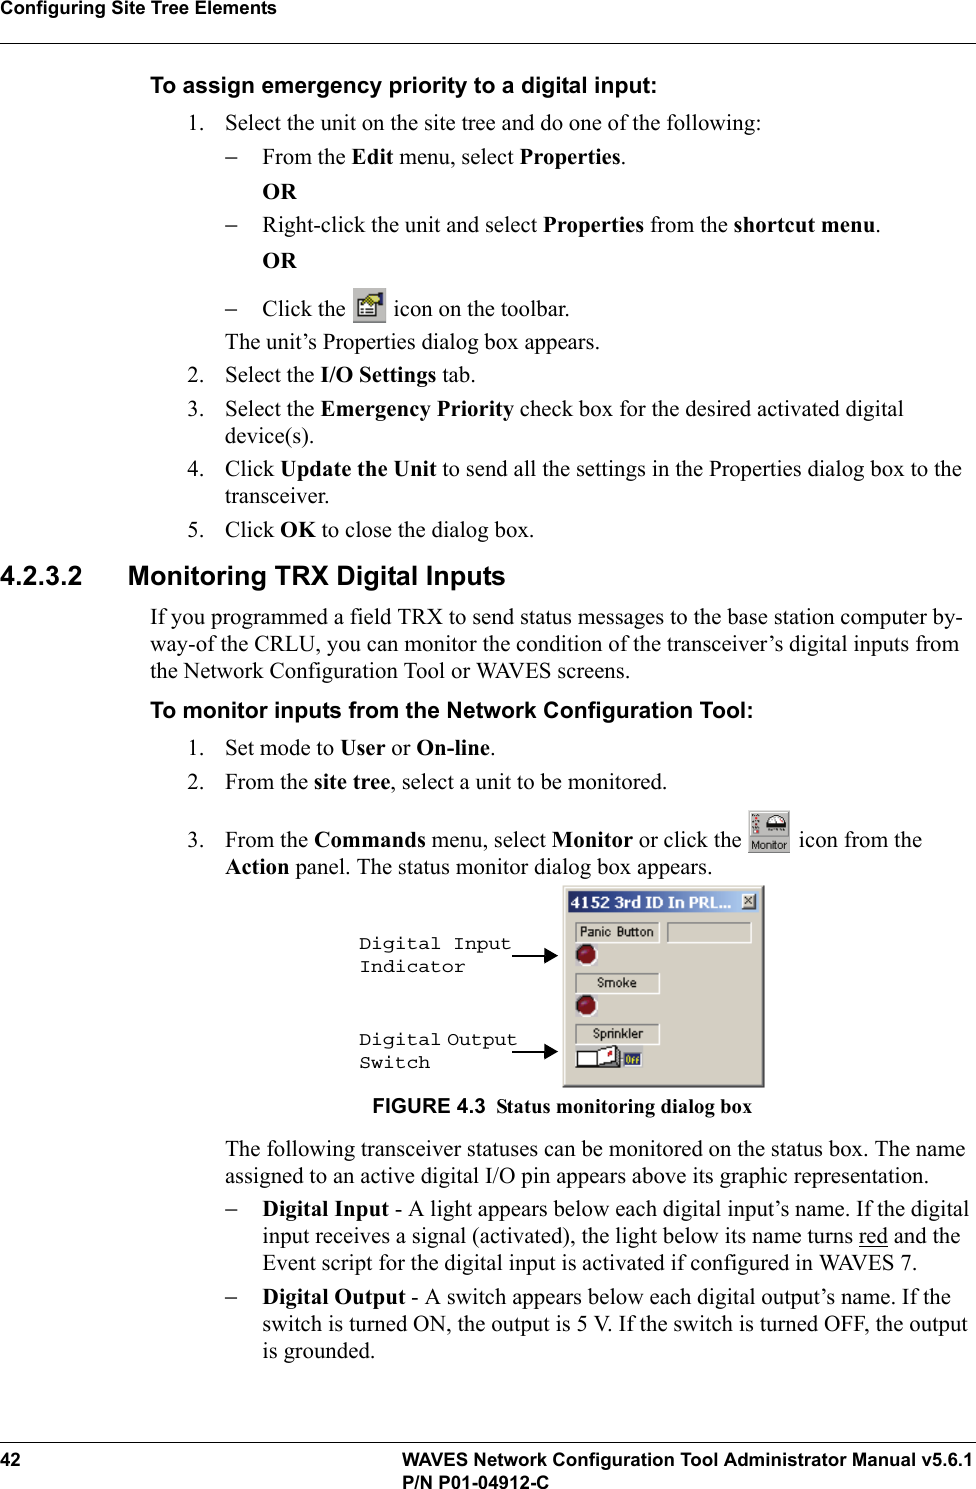 Configuring Site Tree Elements42 WAVES Network Configuration Tool Administrator Manual v5.6.1P/N P01-04912-CTo assign emergency priority to a digital input:1. Select the unit on the site tree and do one of the following:−From the Edit menu, select Properties.OR−Right-click the unit and select Properties from the shortcut menu.OR−Click the   icon on the toolbar.The unit’s Properties dialog box appears. 2. Select the I/O Settings tab.3. Select the Emergency Priority check box for the desired activated digital device(s).4. Click Update the Unit to send all the settings in the Properties dialog box to the transceiver.5. Click OK to close the dialog box.4.2.3.2 Monitoring TRX Digital InputsIf you programmed a field TRX to send status messages to the base station computer by-way-of the CRLU, you can monitor the condition of the transceiver’s digital inputs from the Network Configuration Tool or WAVES screens.To monitor inputs from the Network Configuration Tool:1. Set mode to User or On-line.2. From the site tree, select a unit to be monitored.3. From the Commands menu, select Monitor or click the   icon from the Action panel. The status monitor dialog box appears.FIGURE 4.3 Status monitoring dialog boxThe following transceiver statuses can be monitored on the status box. The name assigned to an active digital I/O pin appears above its graphic representation.−Digital Input - A light appears below each digital input’s name. If the digital input receives a signal (activated), the light below its name turns red and the Event script for the digital input is activated if configured in WAVES 7.−Digital Output - A switch appears below each digital output’s name. If the switch is turned ON, the output is 5 V. If the switch is turned OFF, the output is grounded.Digital Input IndicatorDigital Output Switch